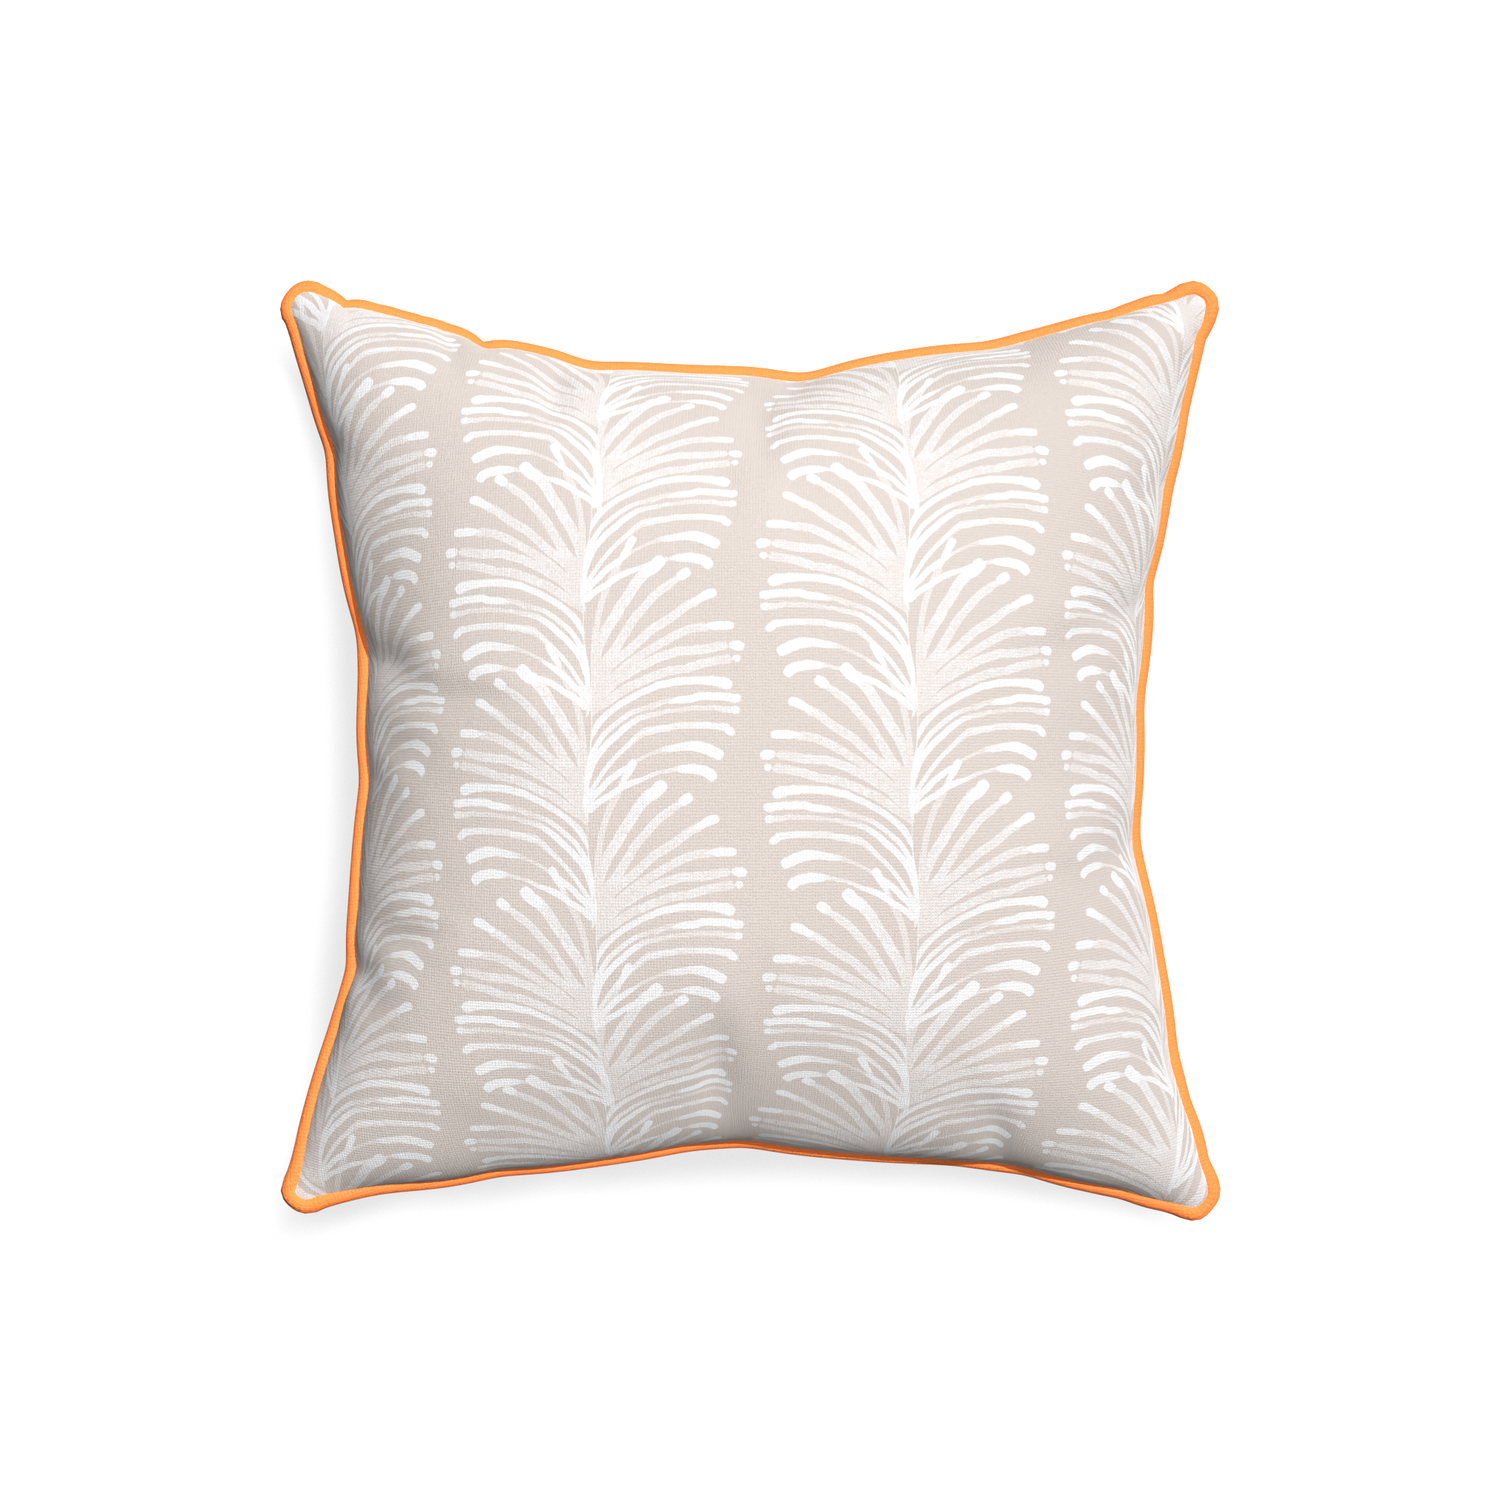 20-square emma sand custom pillow with clementine piping on white background